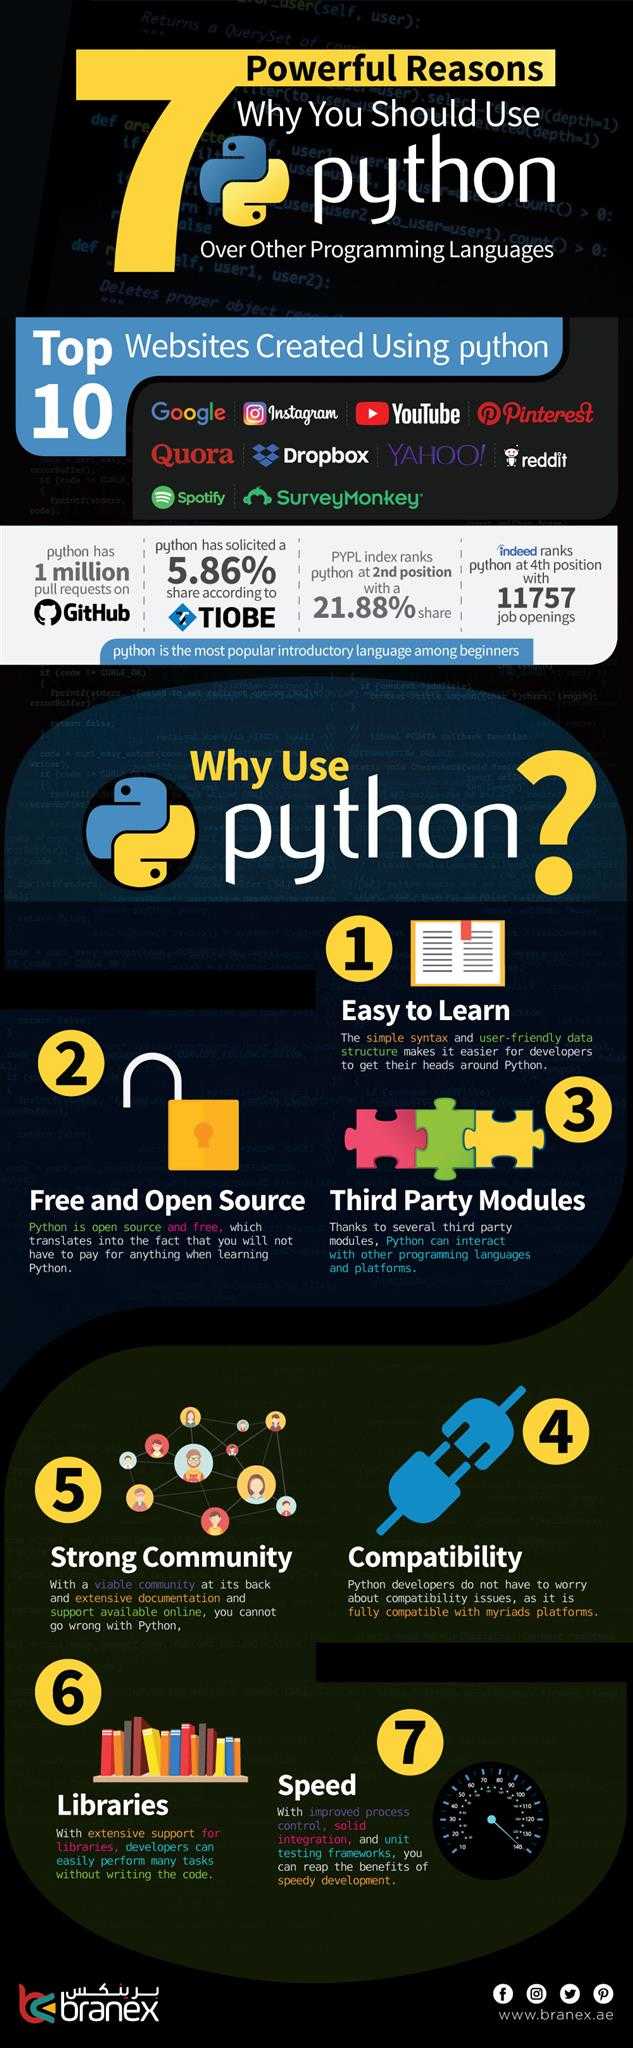 7-Powerful-Reasons-Why-You-Should-Use-Python